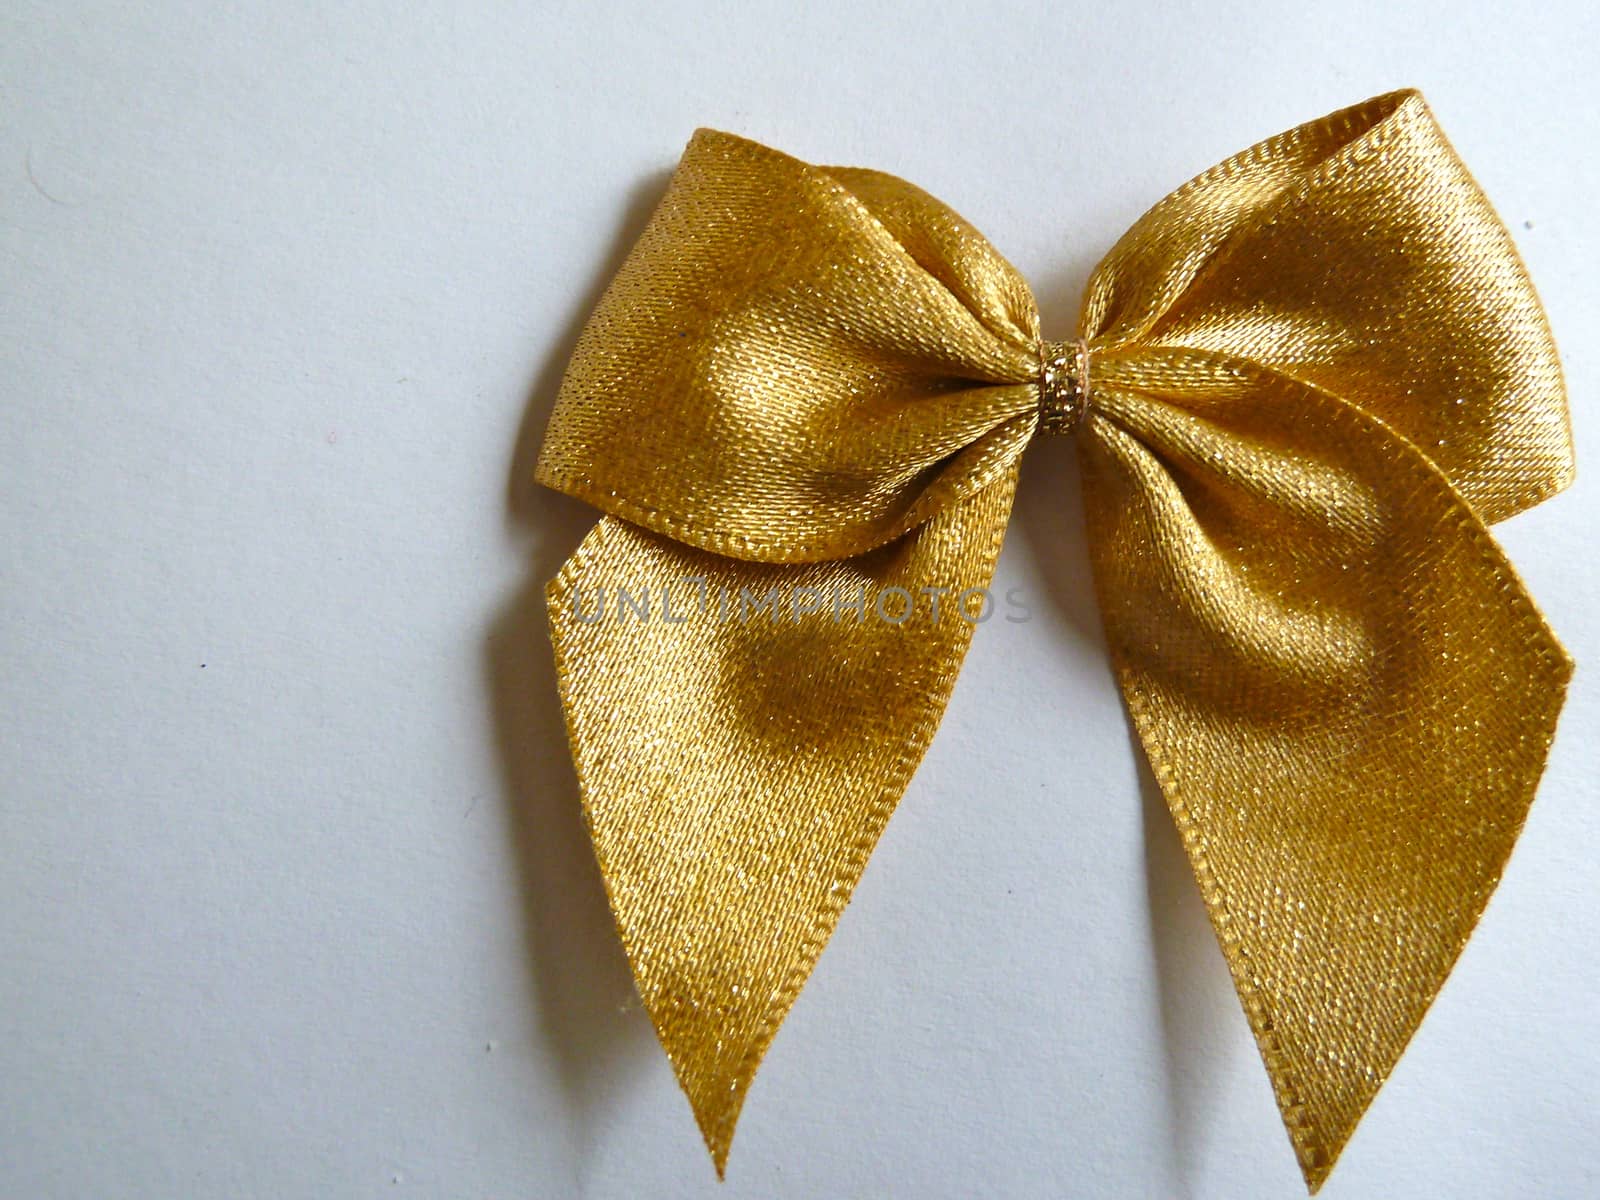 Bright gold ribbon closeup on a white background